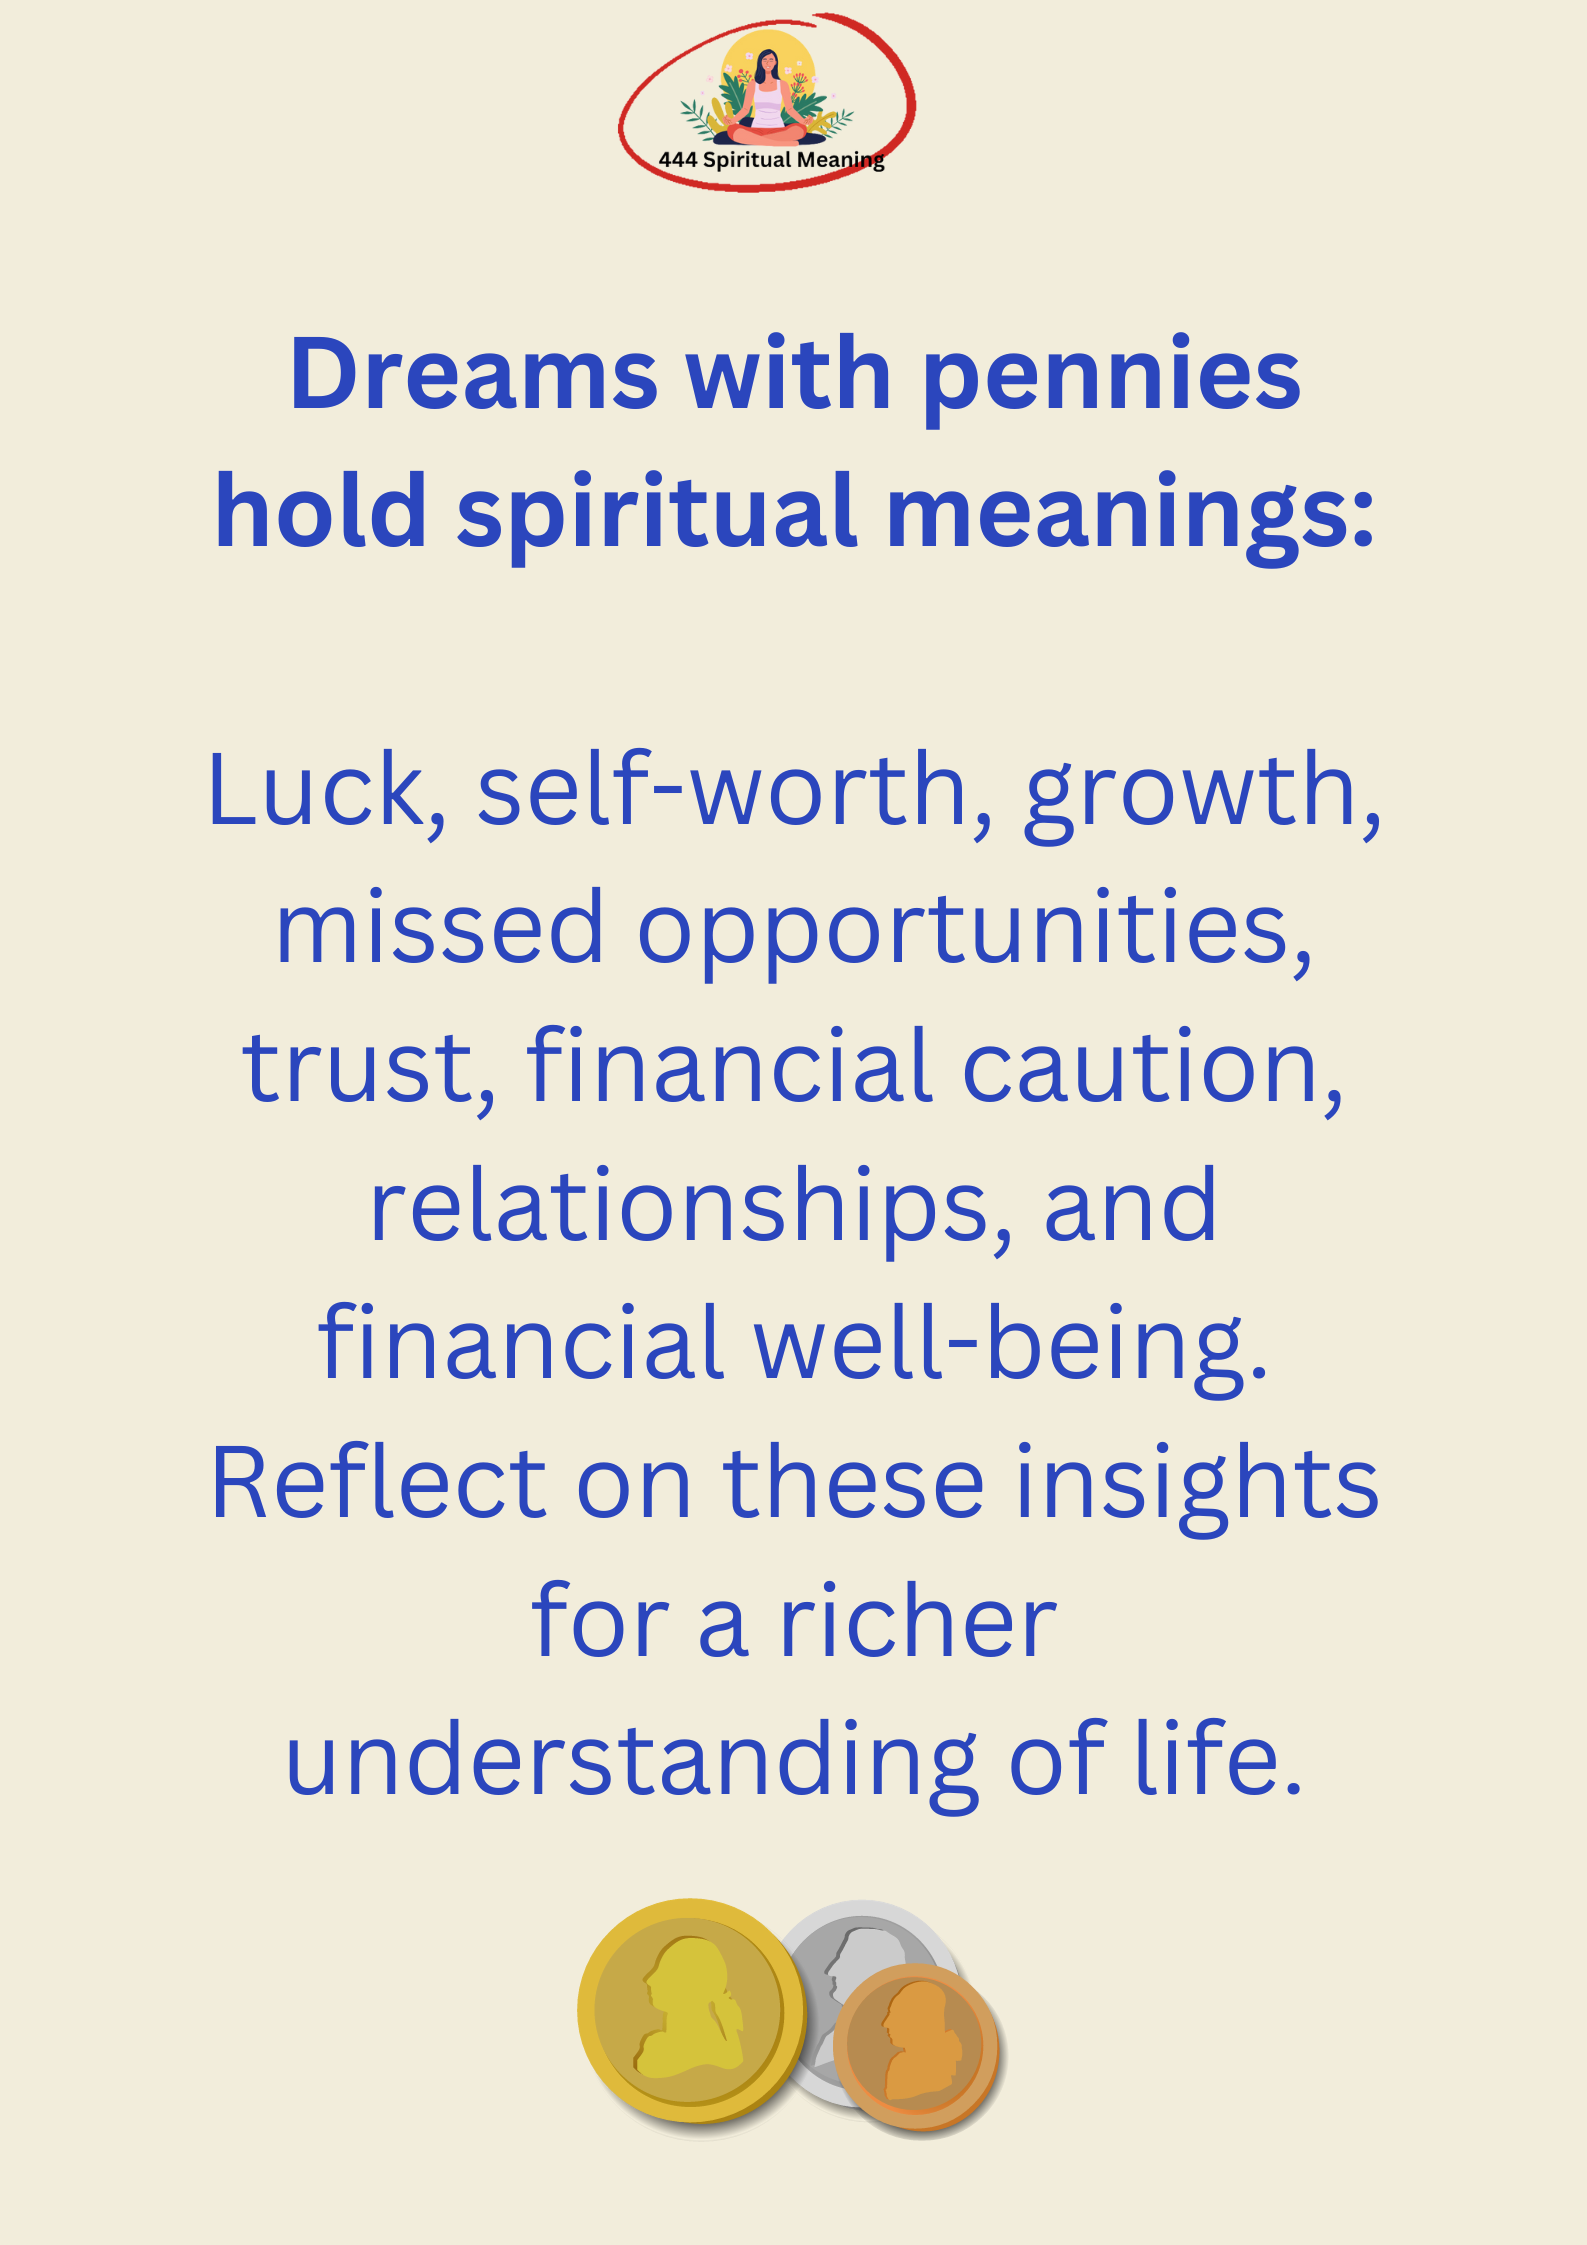 Dreams with pennies hold spiritual meanings: